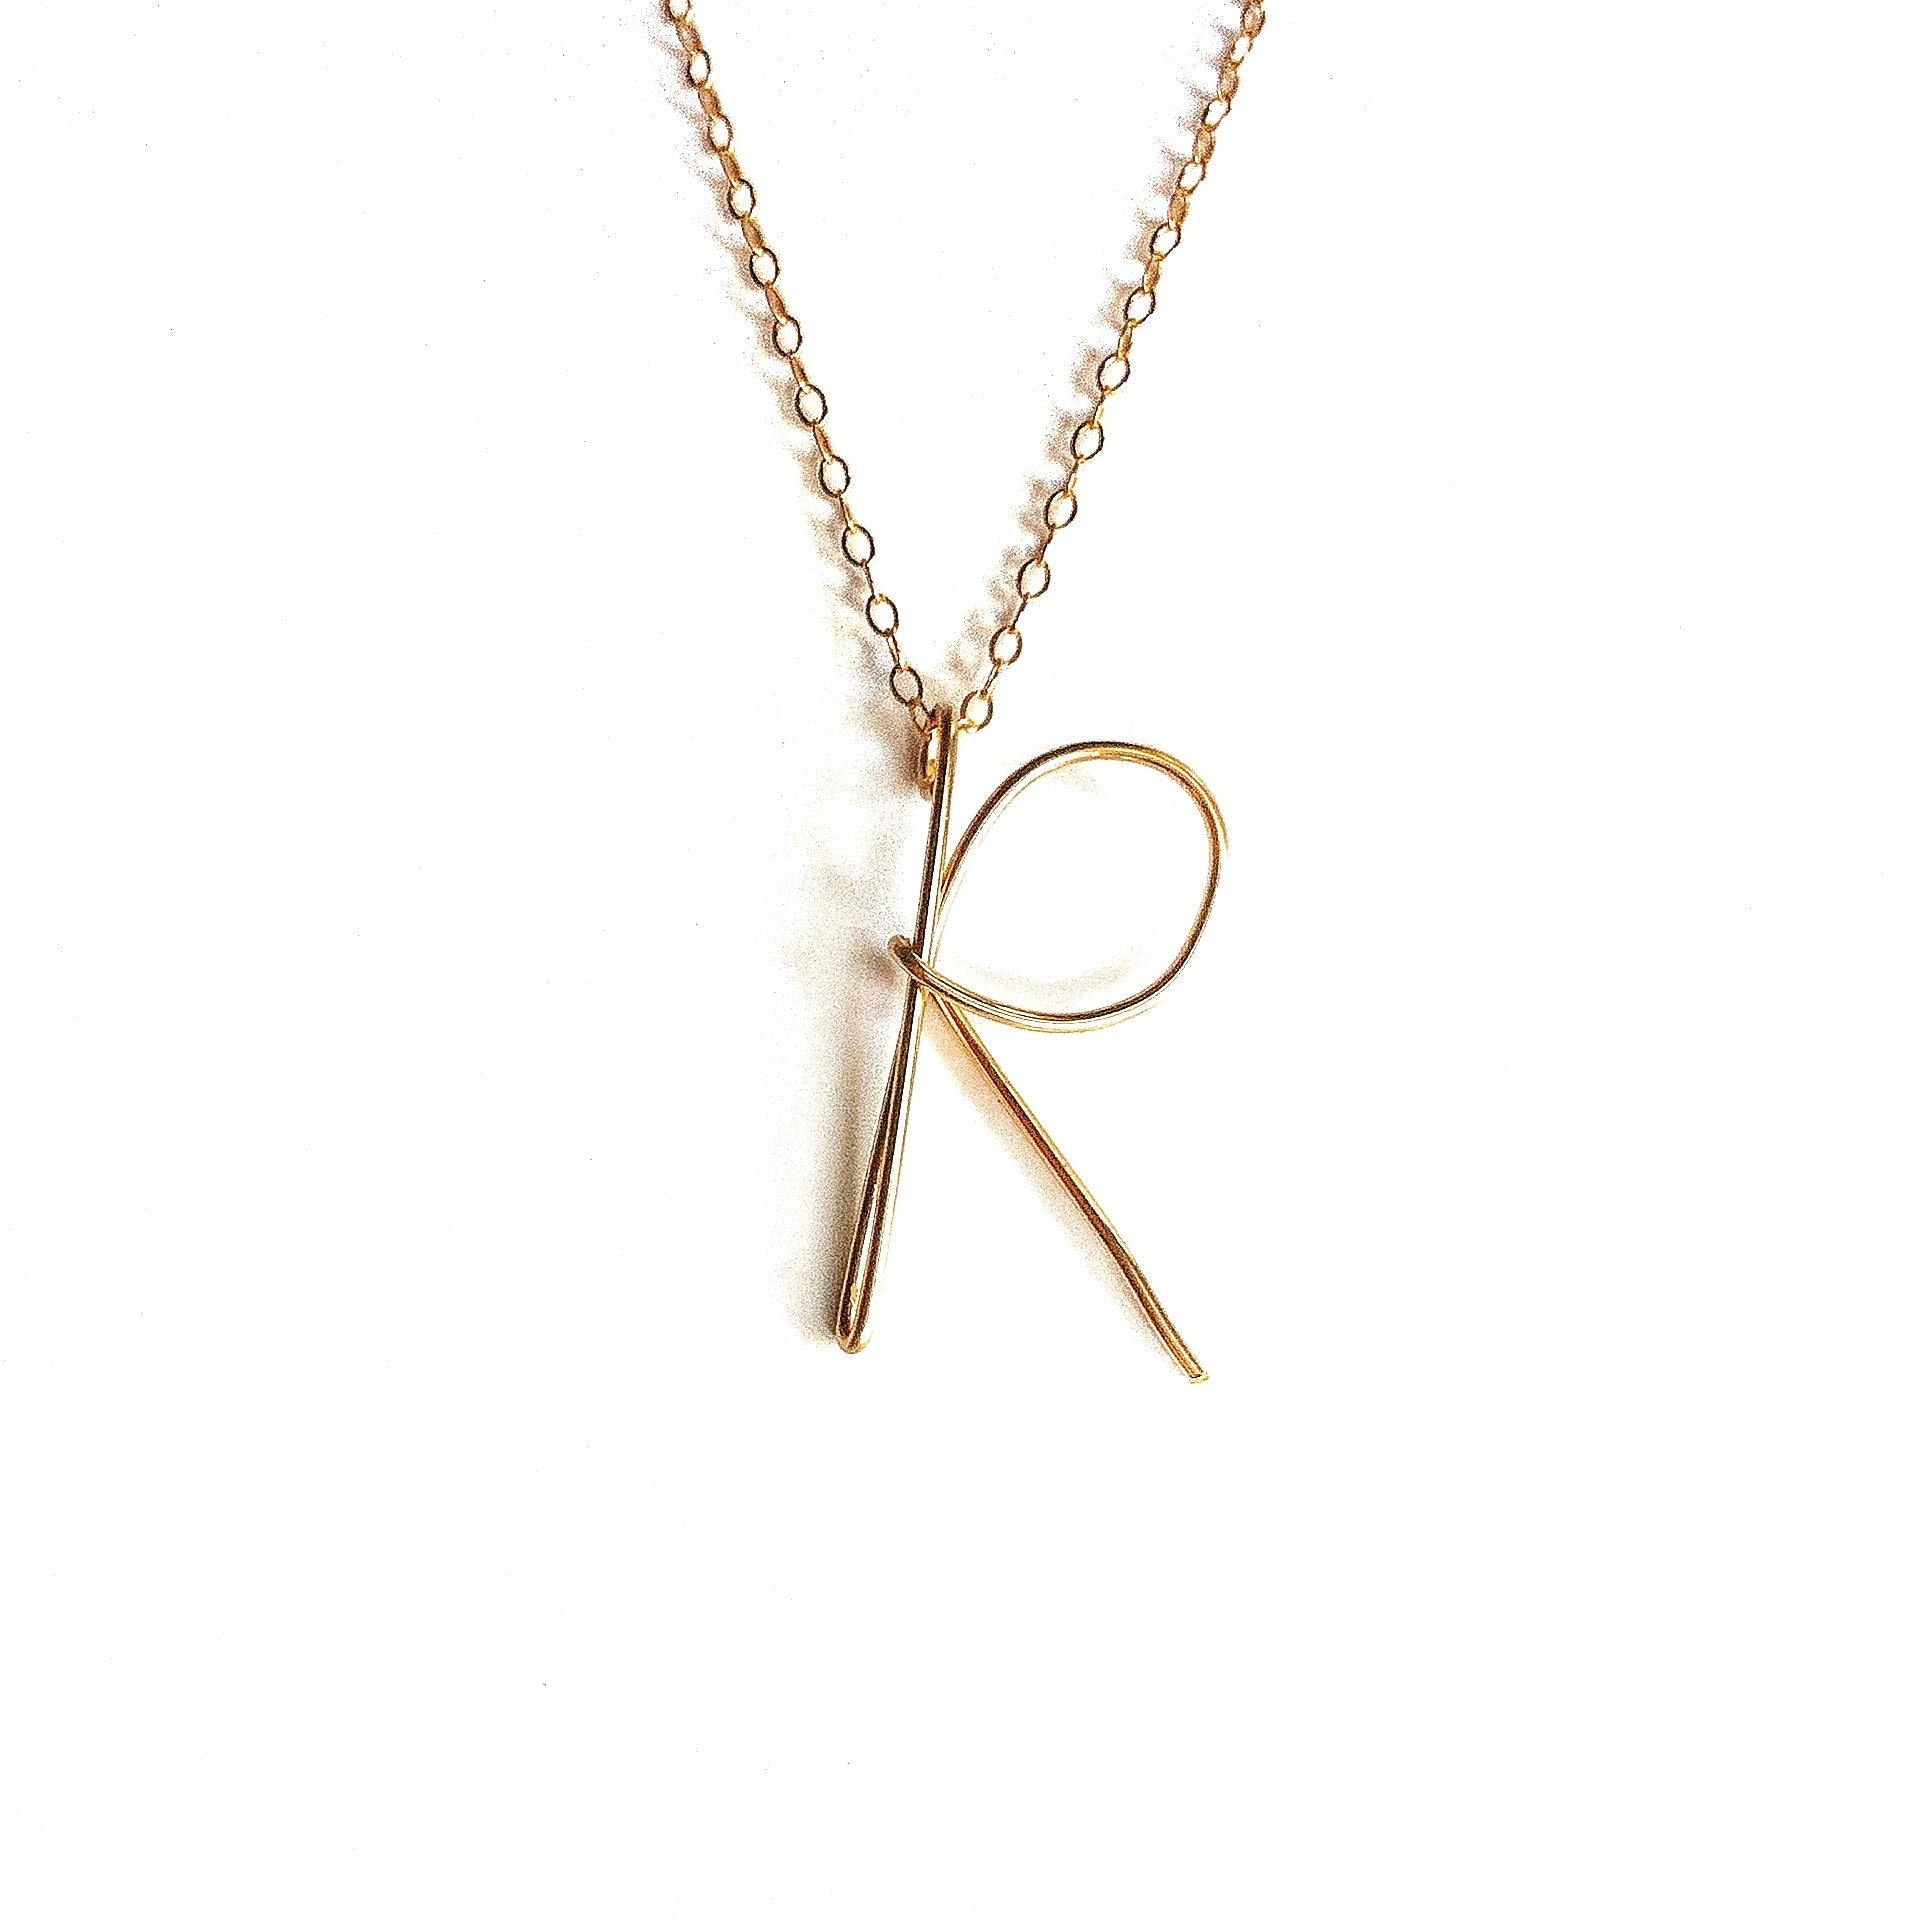 Handmade Initial Necklace Robyn Canady R 14K Gold Filled 